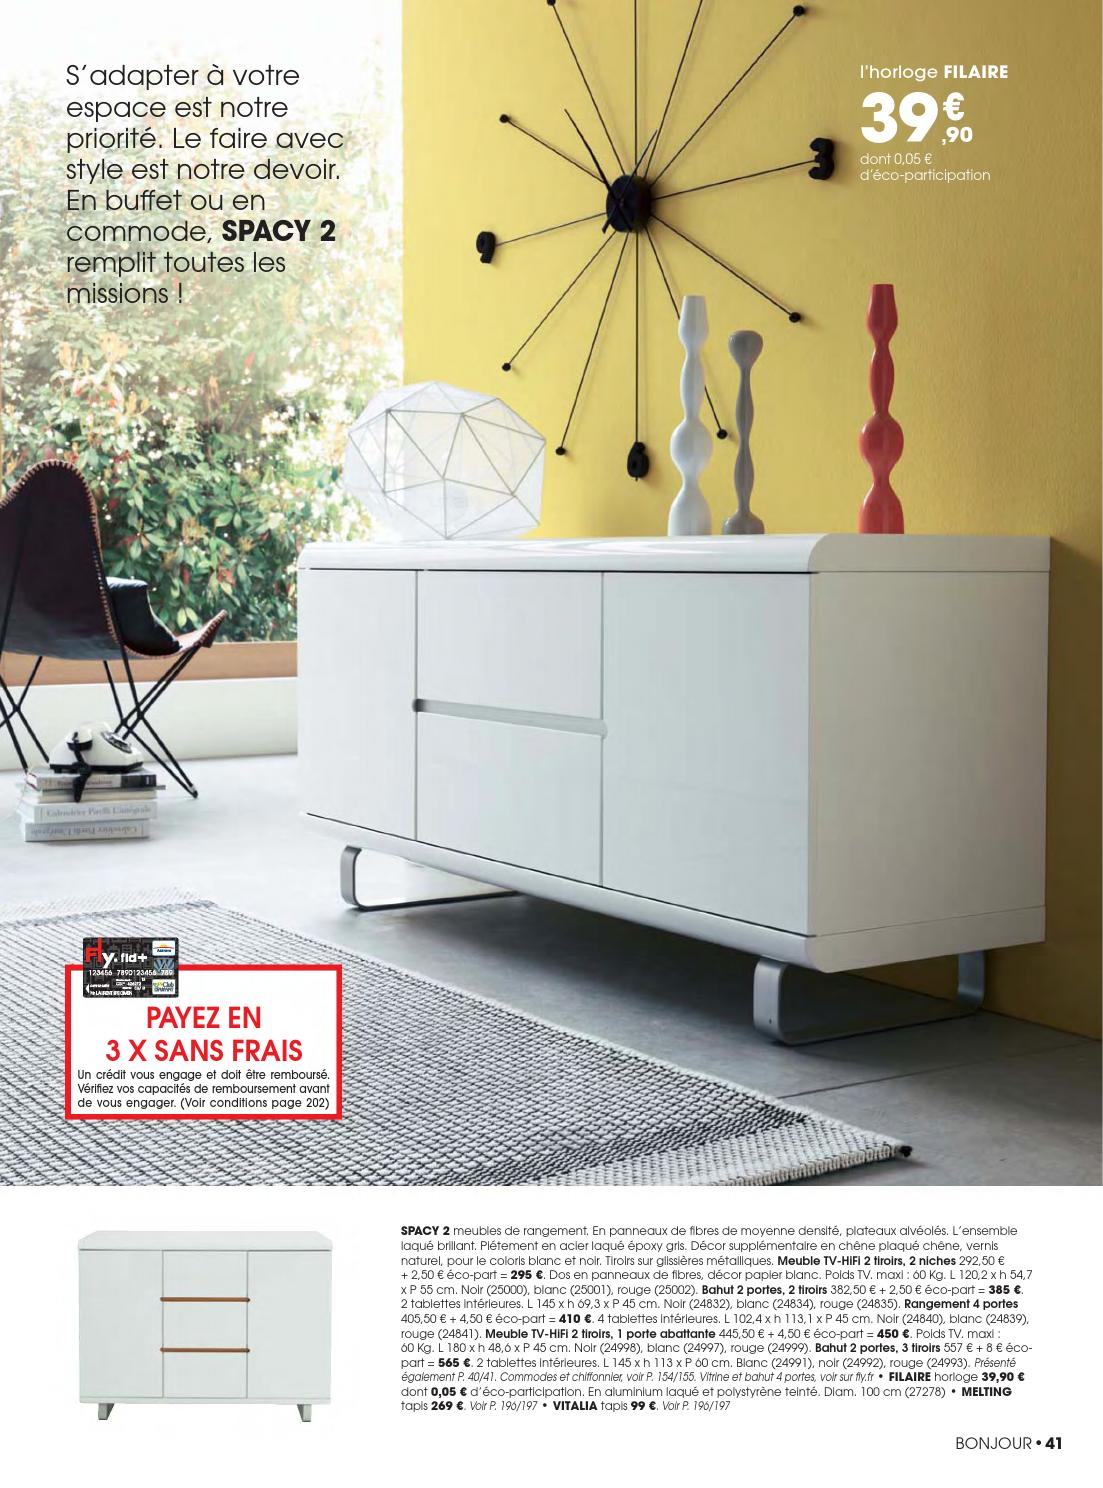 Catalogue Fly - Collection 2013/2014 By Joe Monroe - Issuu encequiconcerne Commode Blanc Laqué Fly